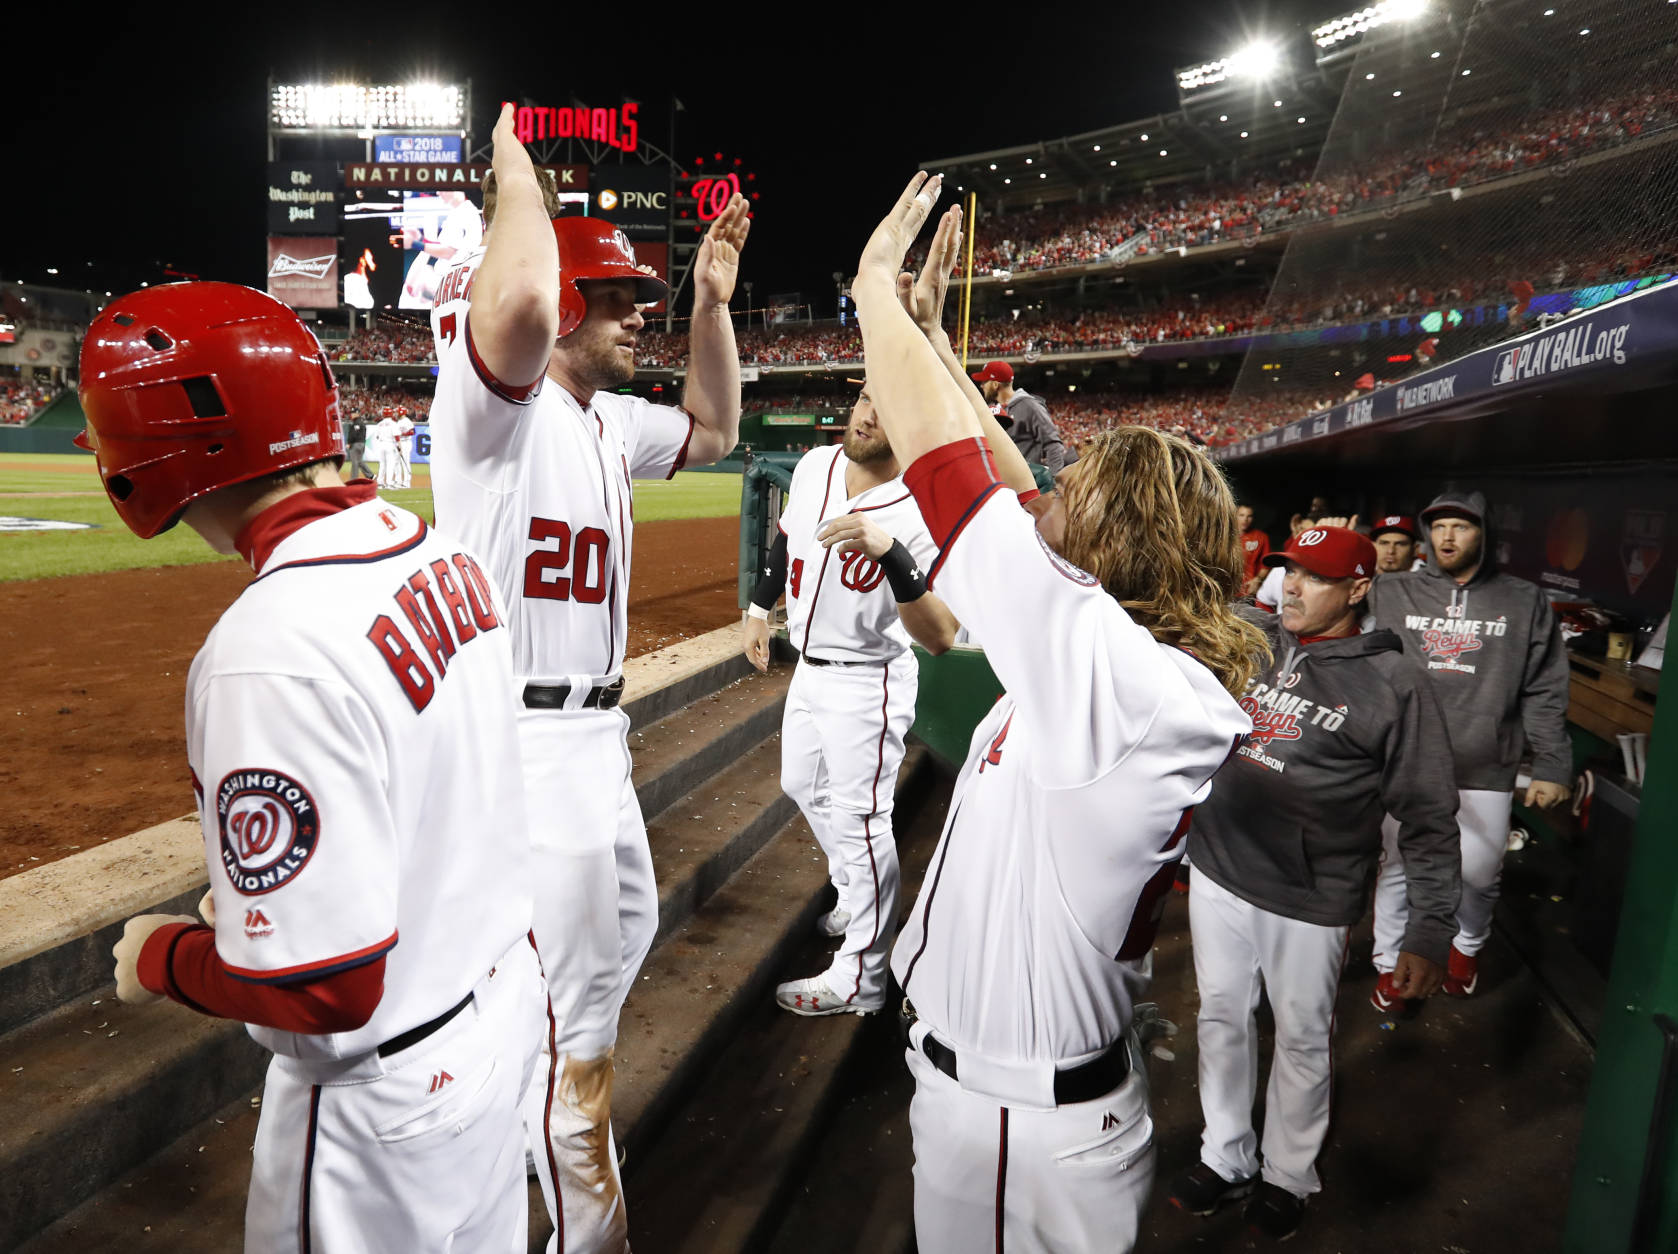 Washington Nationals' Daniel Murphy (20) celebrates in the dugout with teammates Jayson Werth (28) and Bryce Harper (34) after scoring during the second inning in Game 5 of baseball's National League Division Series against Los Angeles Dodgers, at Nationals Park, Thursday, Oct. 13, 2016, in Washington. (AP Photo/Alex Brandon)